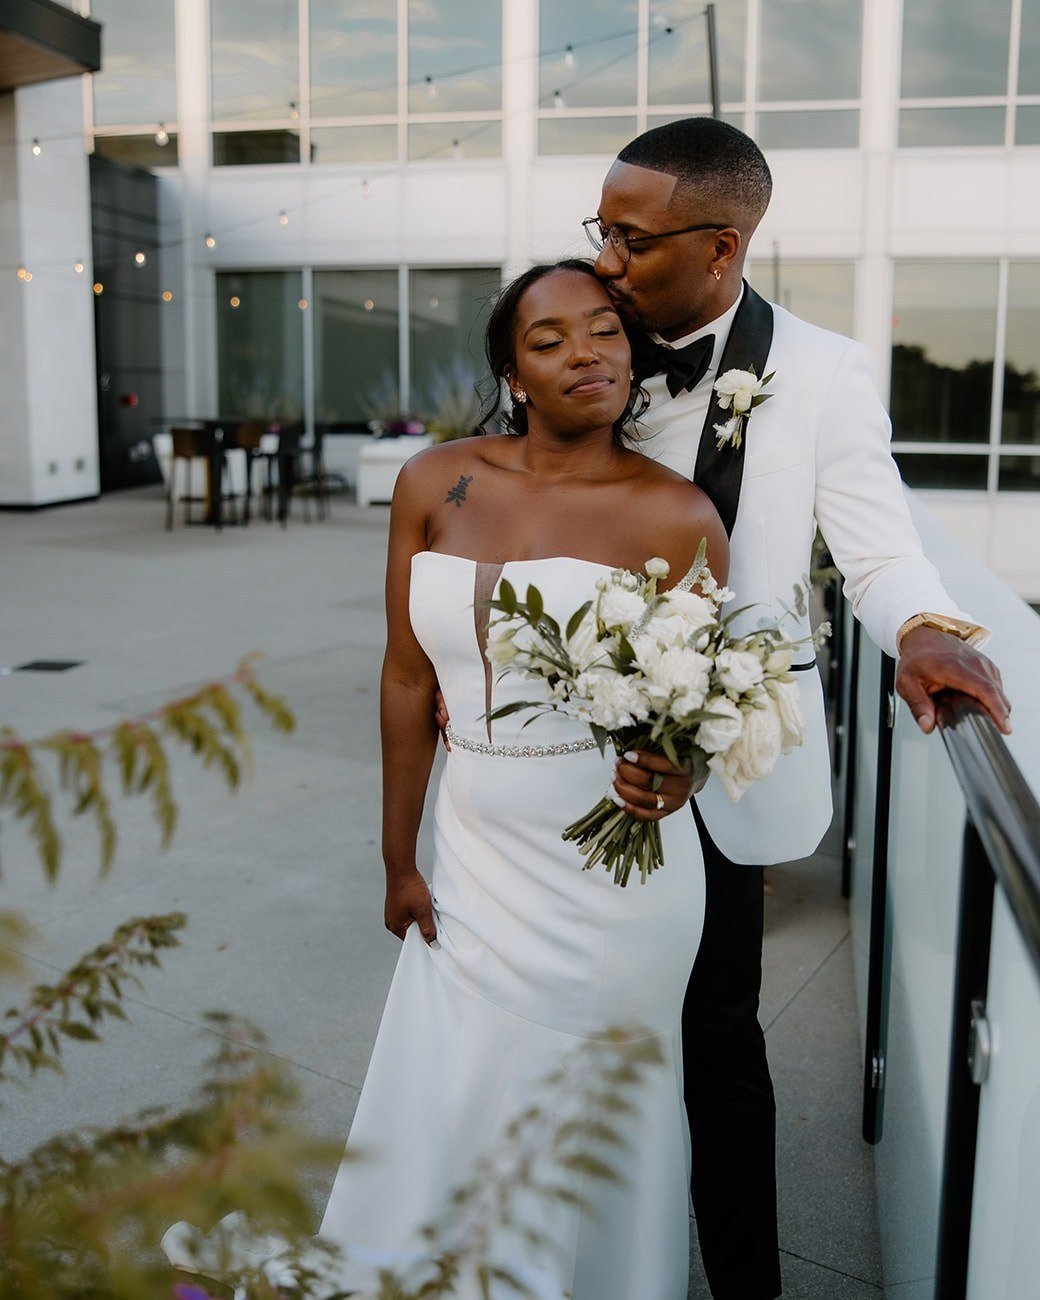 A sweet summer wedding moment on the Terrace with Nakia and Justin 💙 

Photography by @ jaclynwillmanphoto 
Catering by @togethercoevents
Music by @marly_mcfly87
Dessert by @kennedys_kakes
Video by @weddingstoriesinmotion 

#ColumbusWeddings #Columb